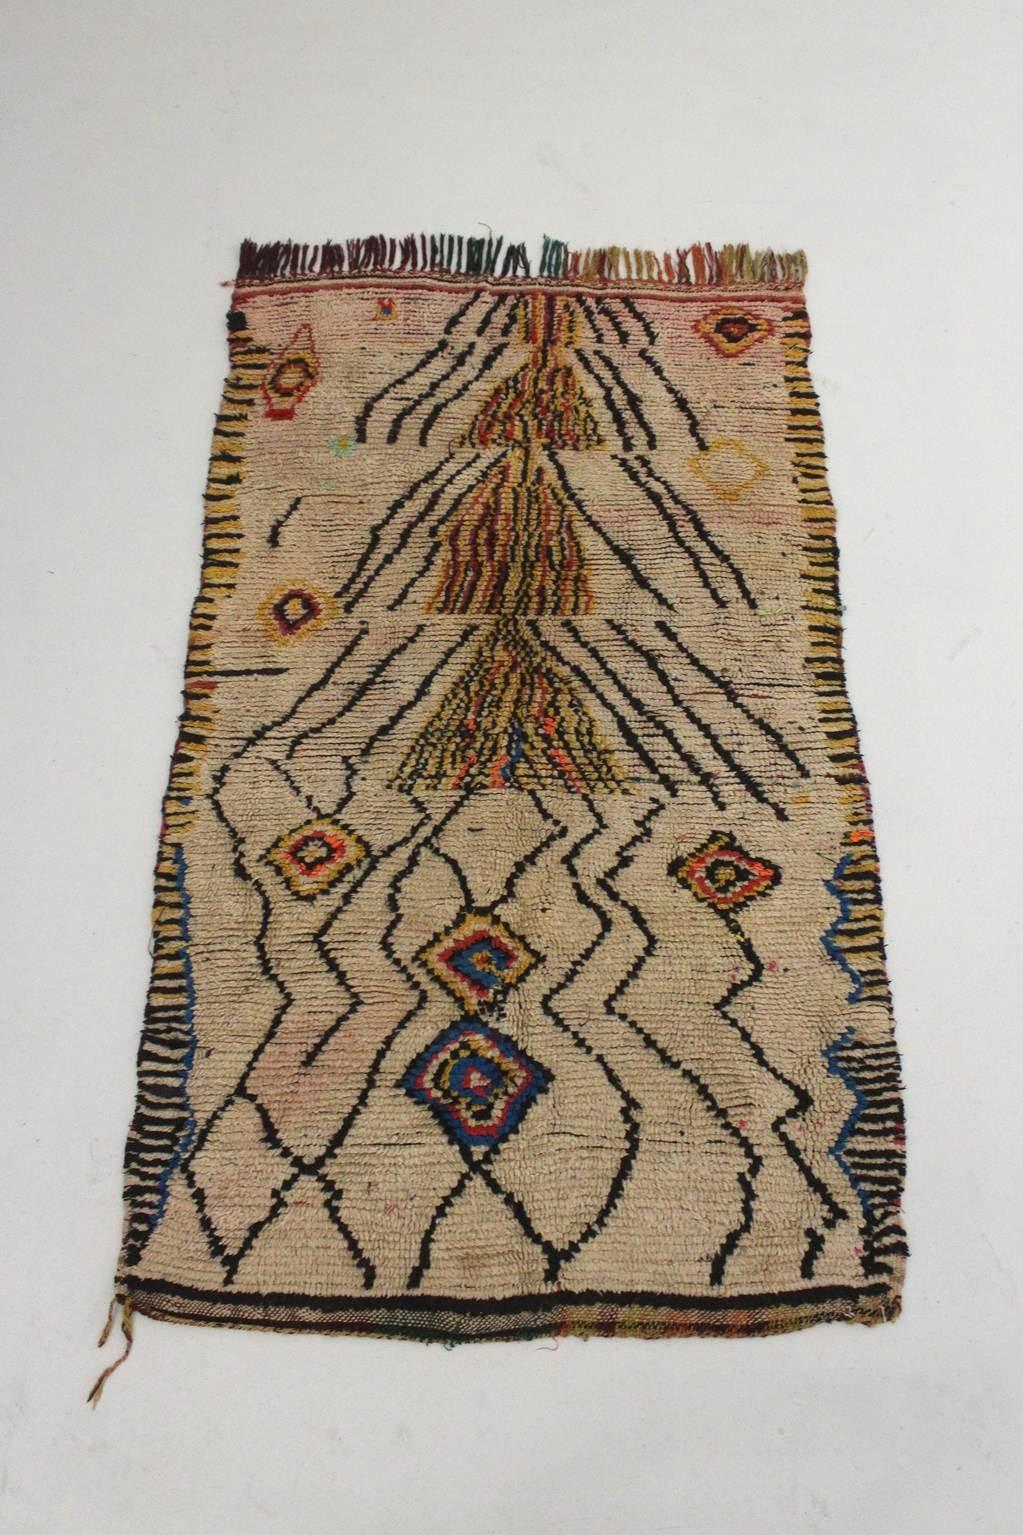 I am so glad I can bring this beautiful rug to the selection! It was sourced in the area of Aït Bouguemez, Azilal, Morocco. It is a real vintage Azilal rug with signs of age but I love the whole composition so much that I couldn't let it go! I will